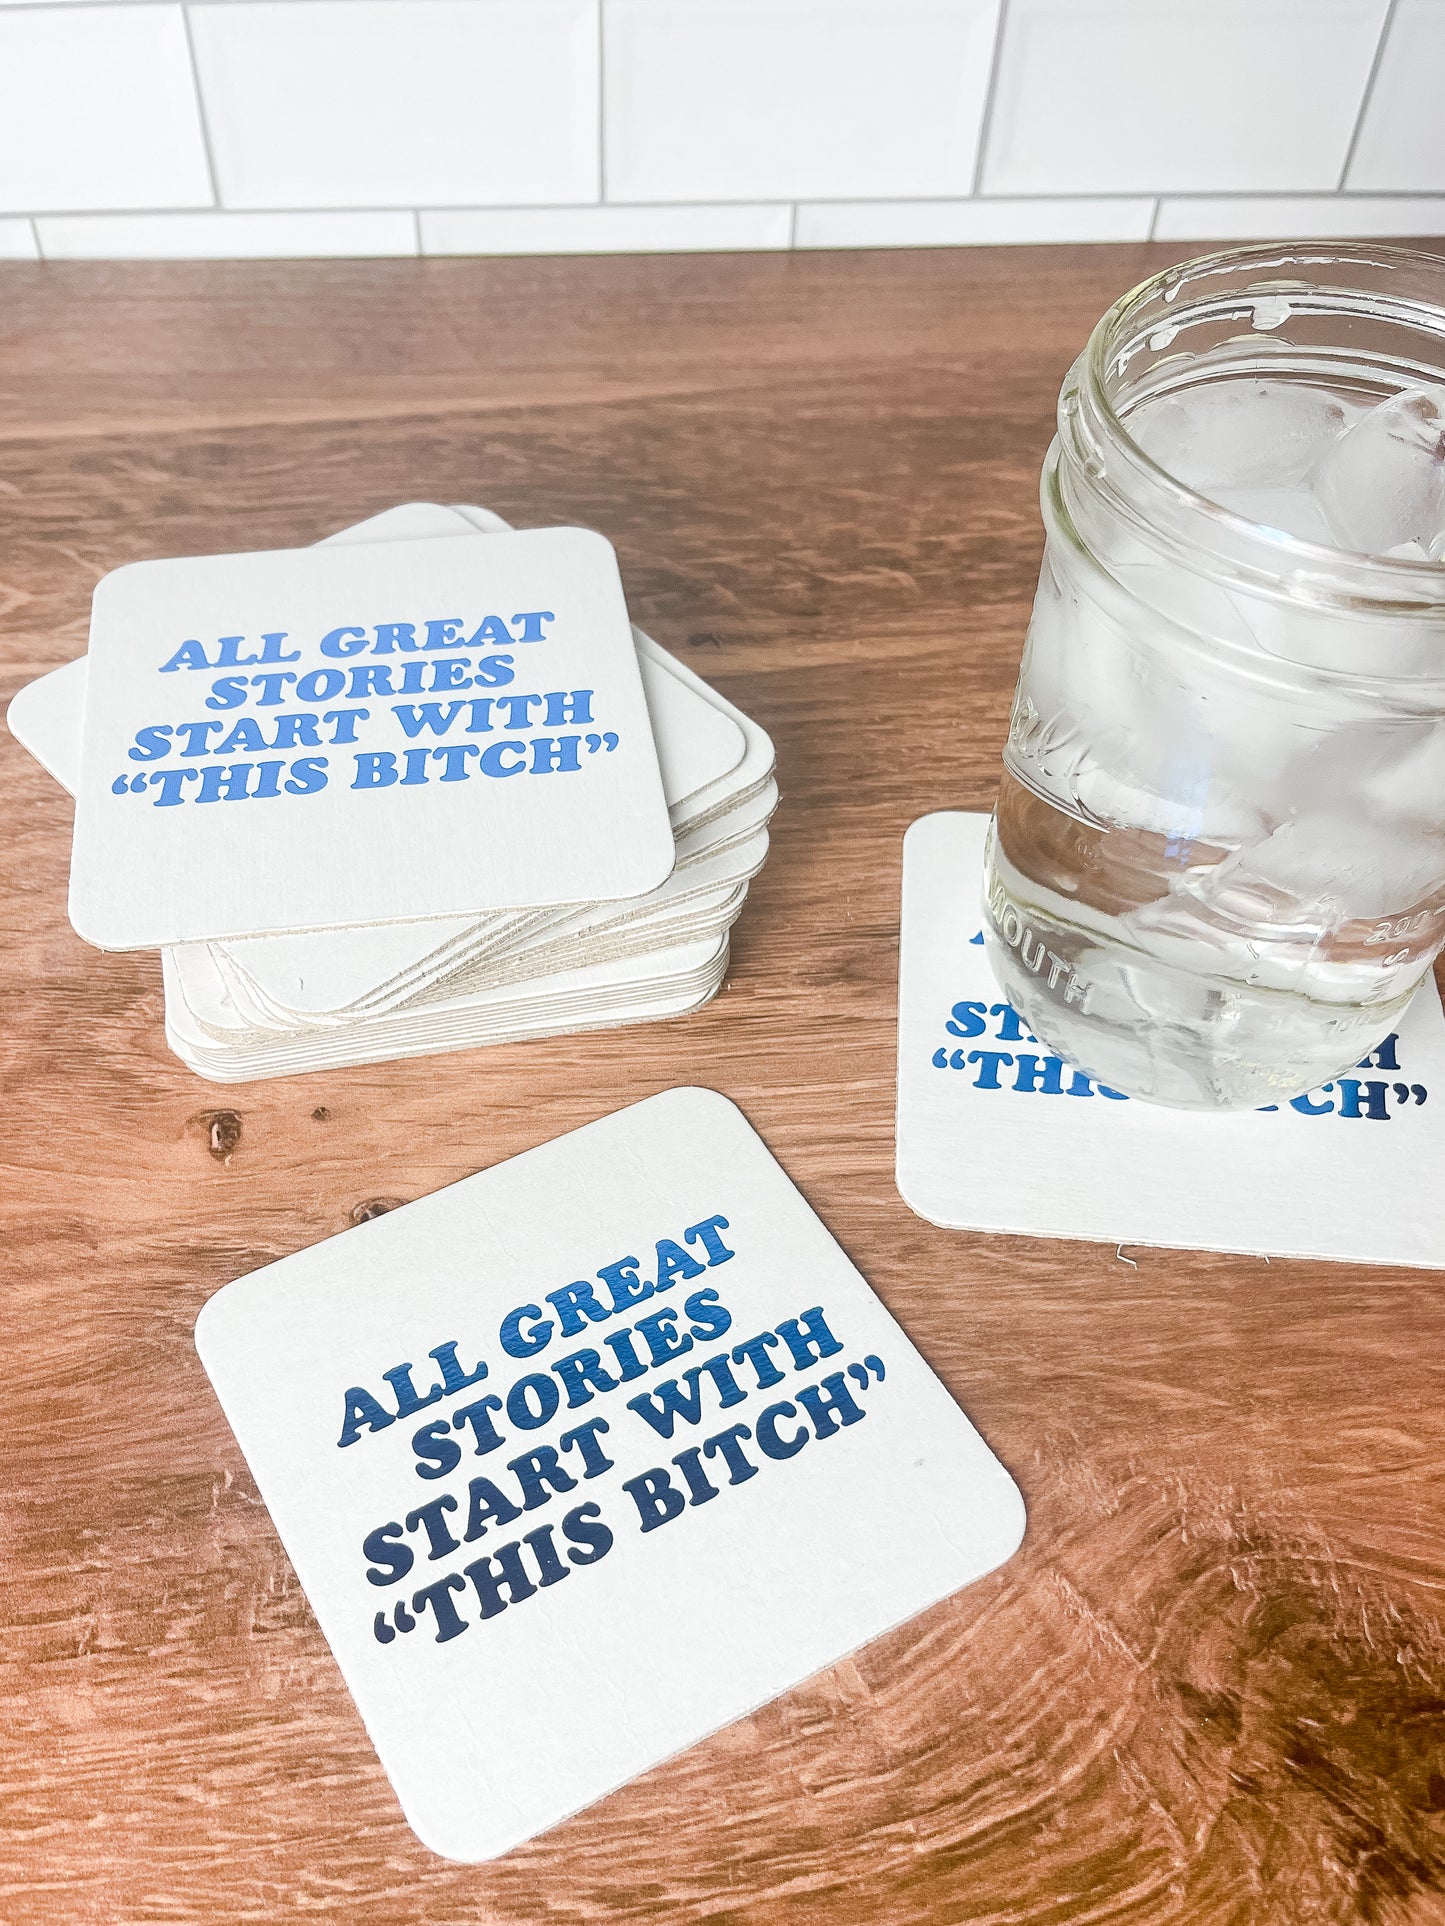 All Great Stories Start with "This Bitch" Coaster Set